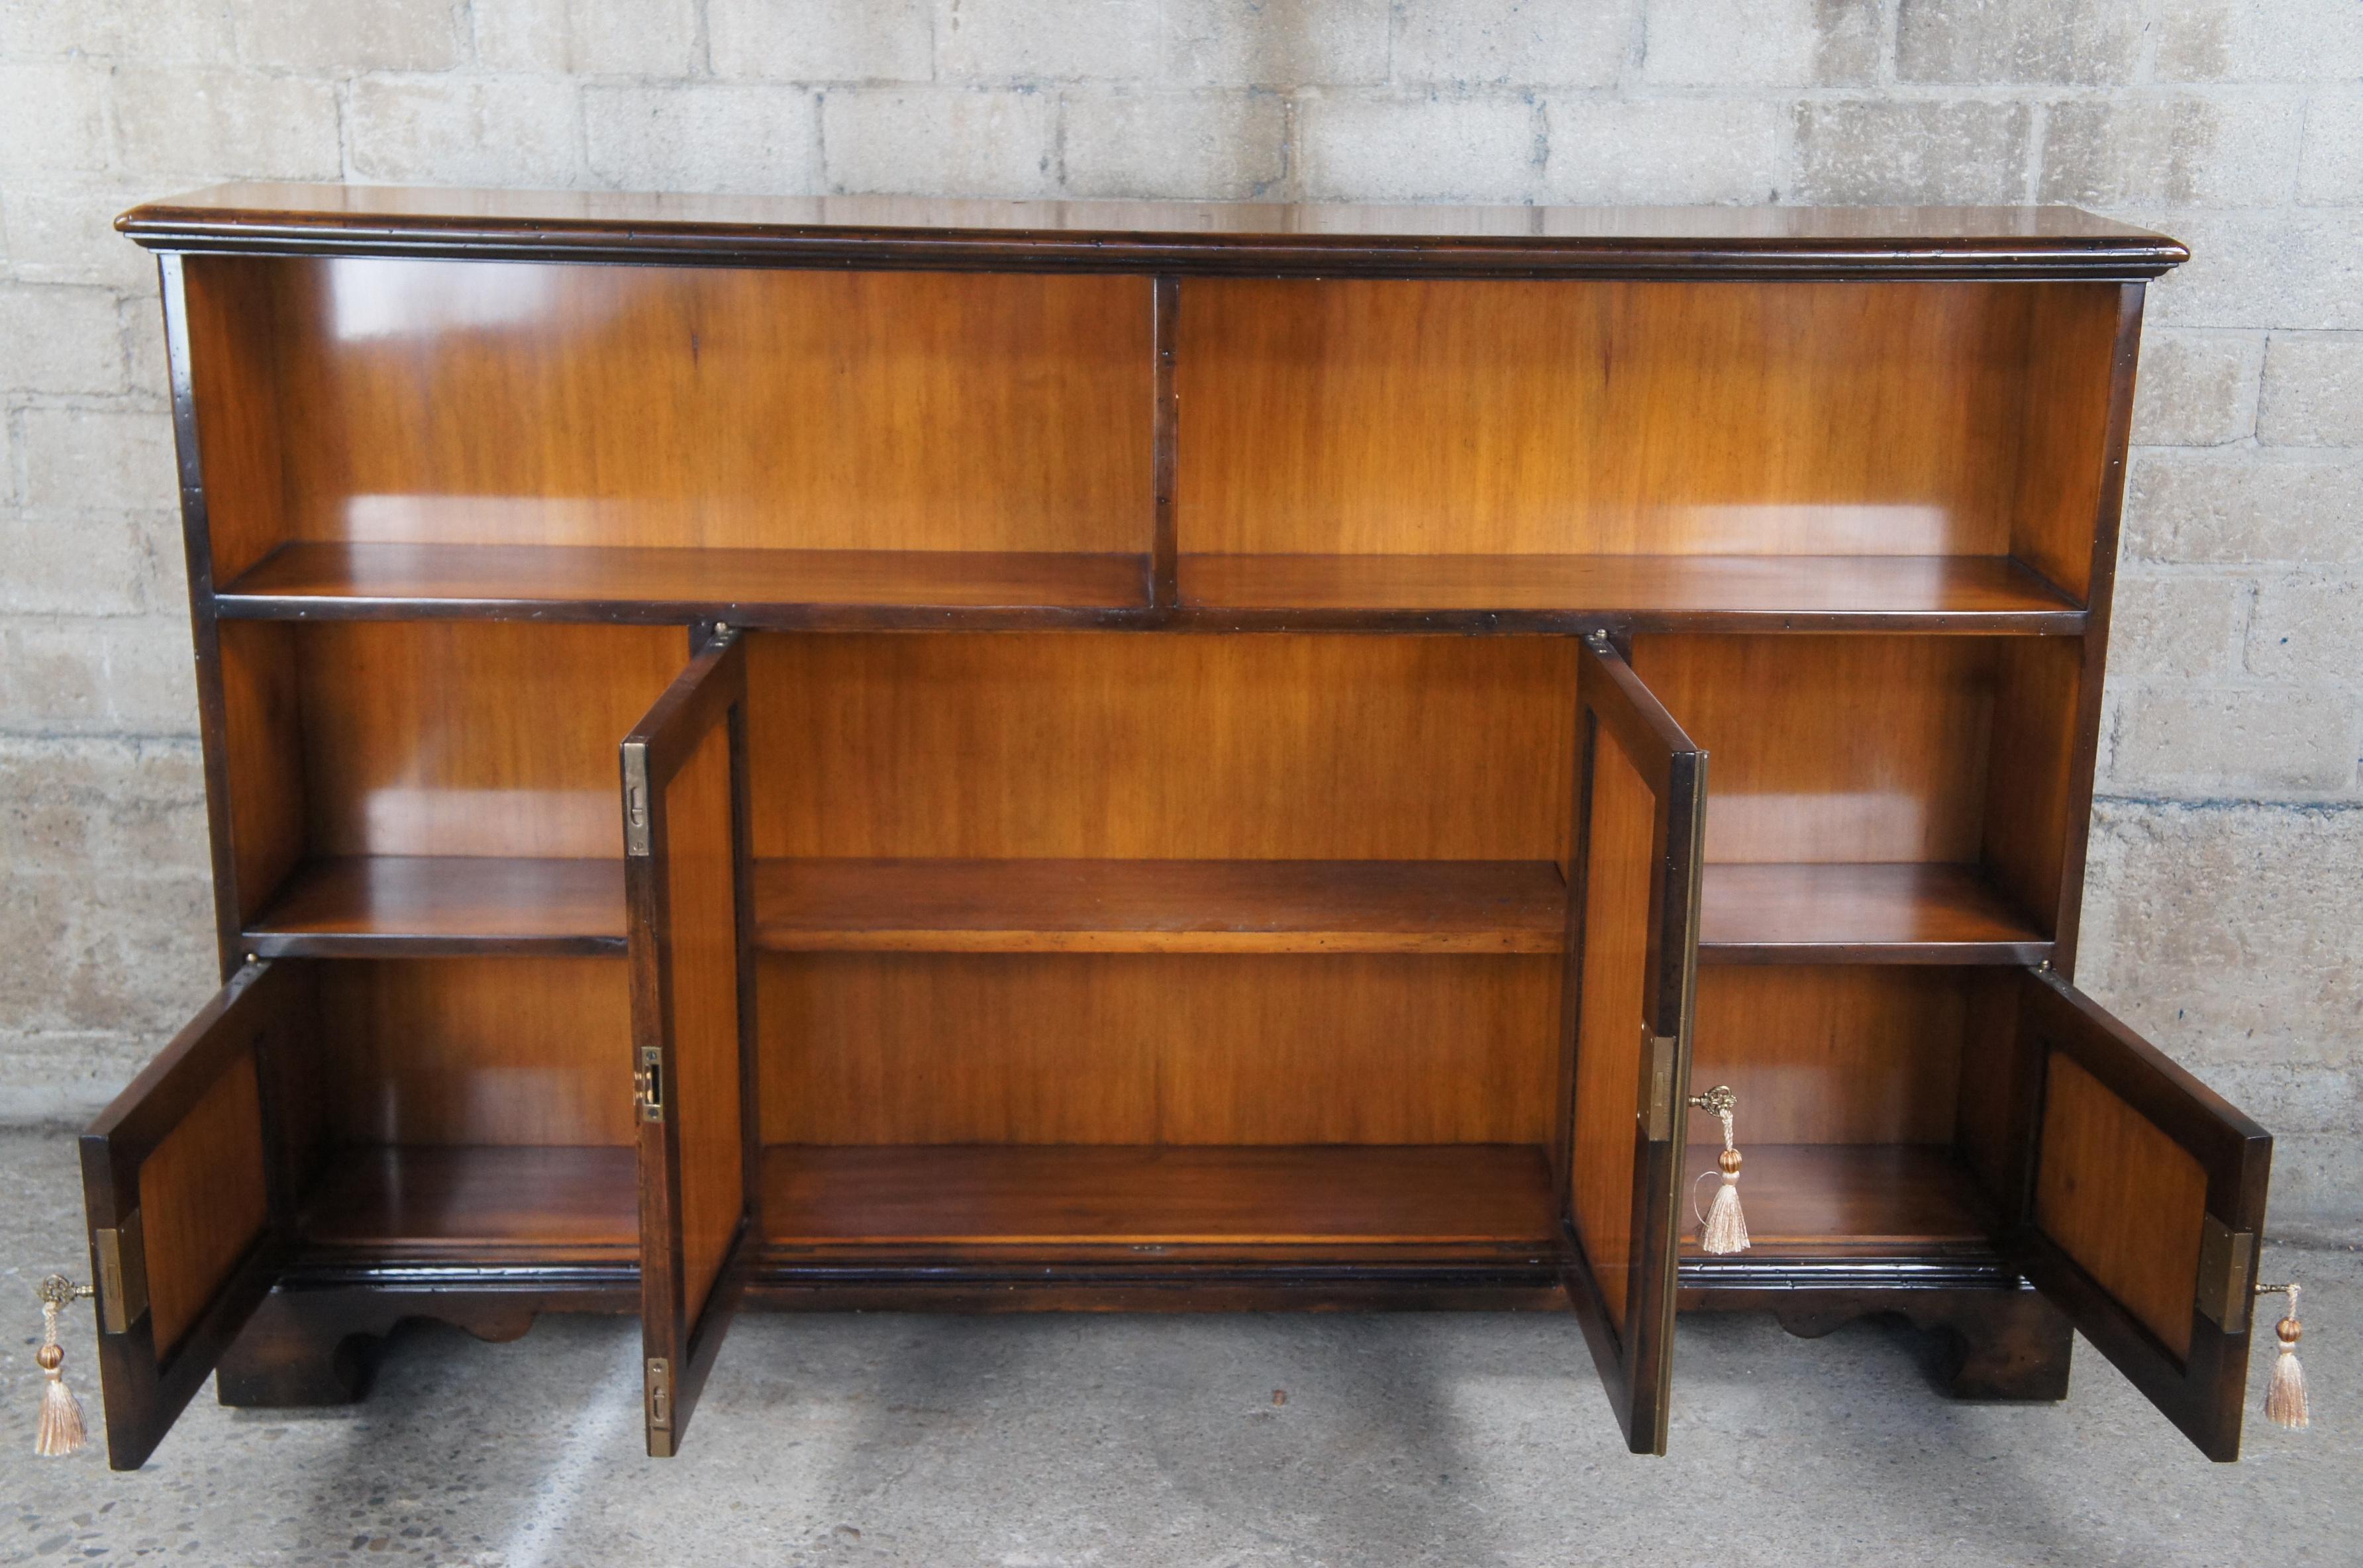 20th Century Theodore Alexander Chateau Du Vallois Console Sideboard Bookcase Cabinet For Sale